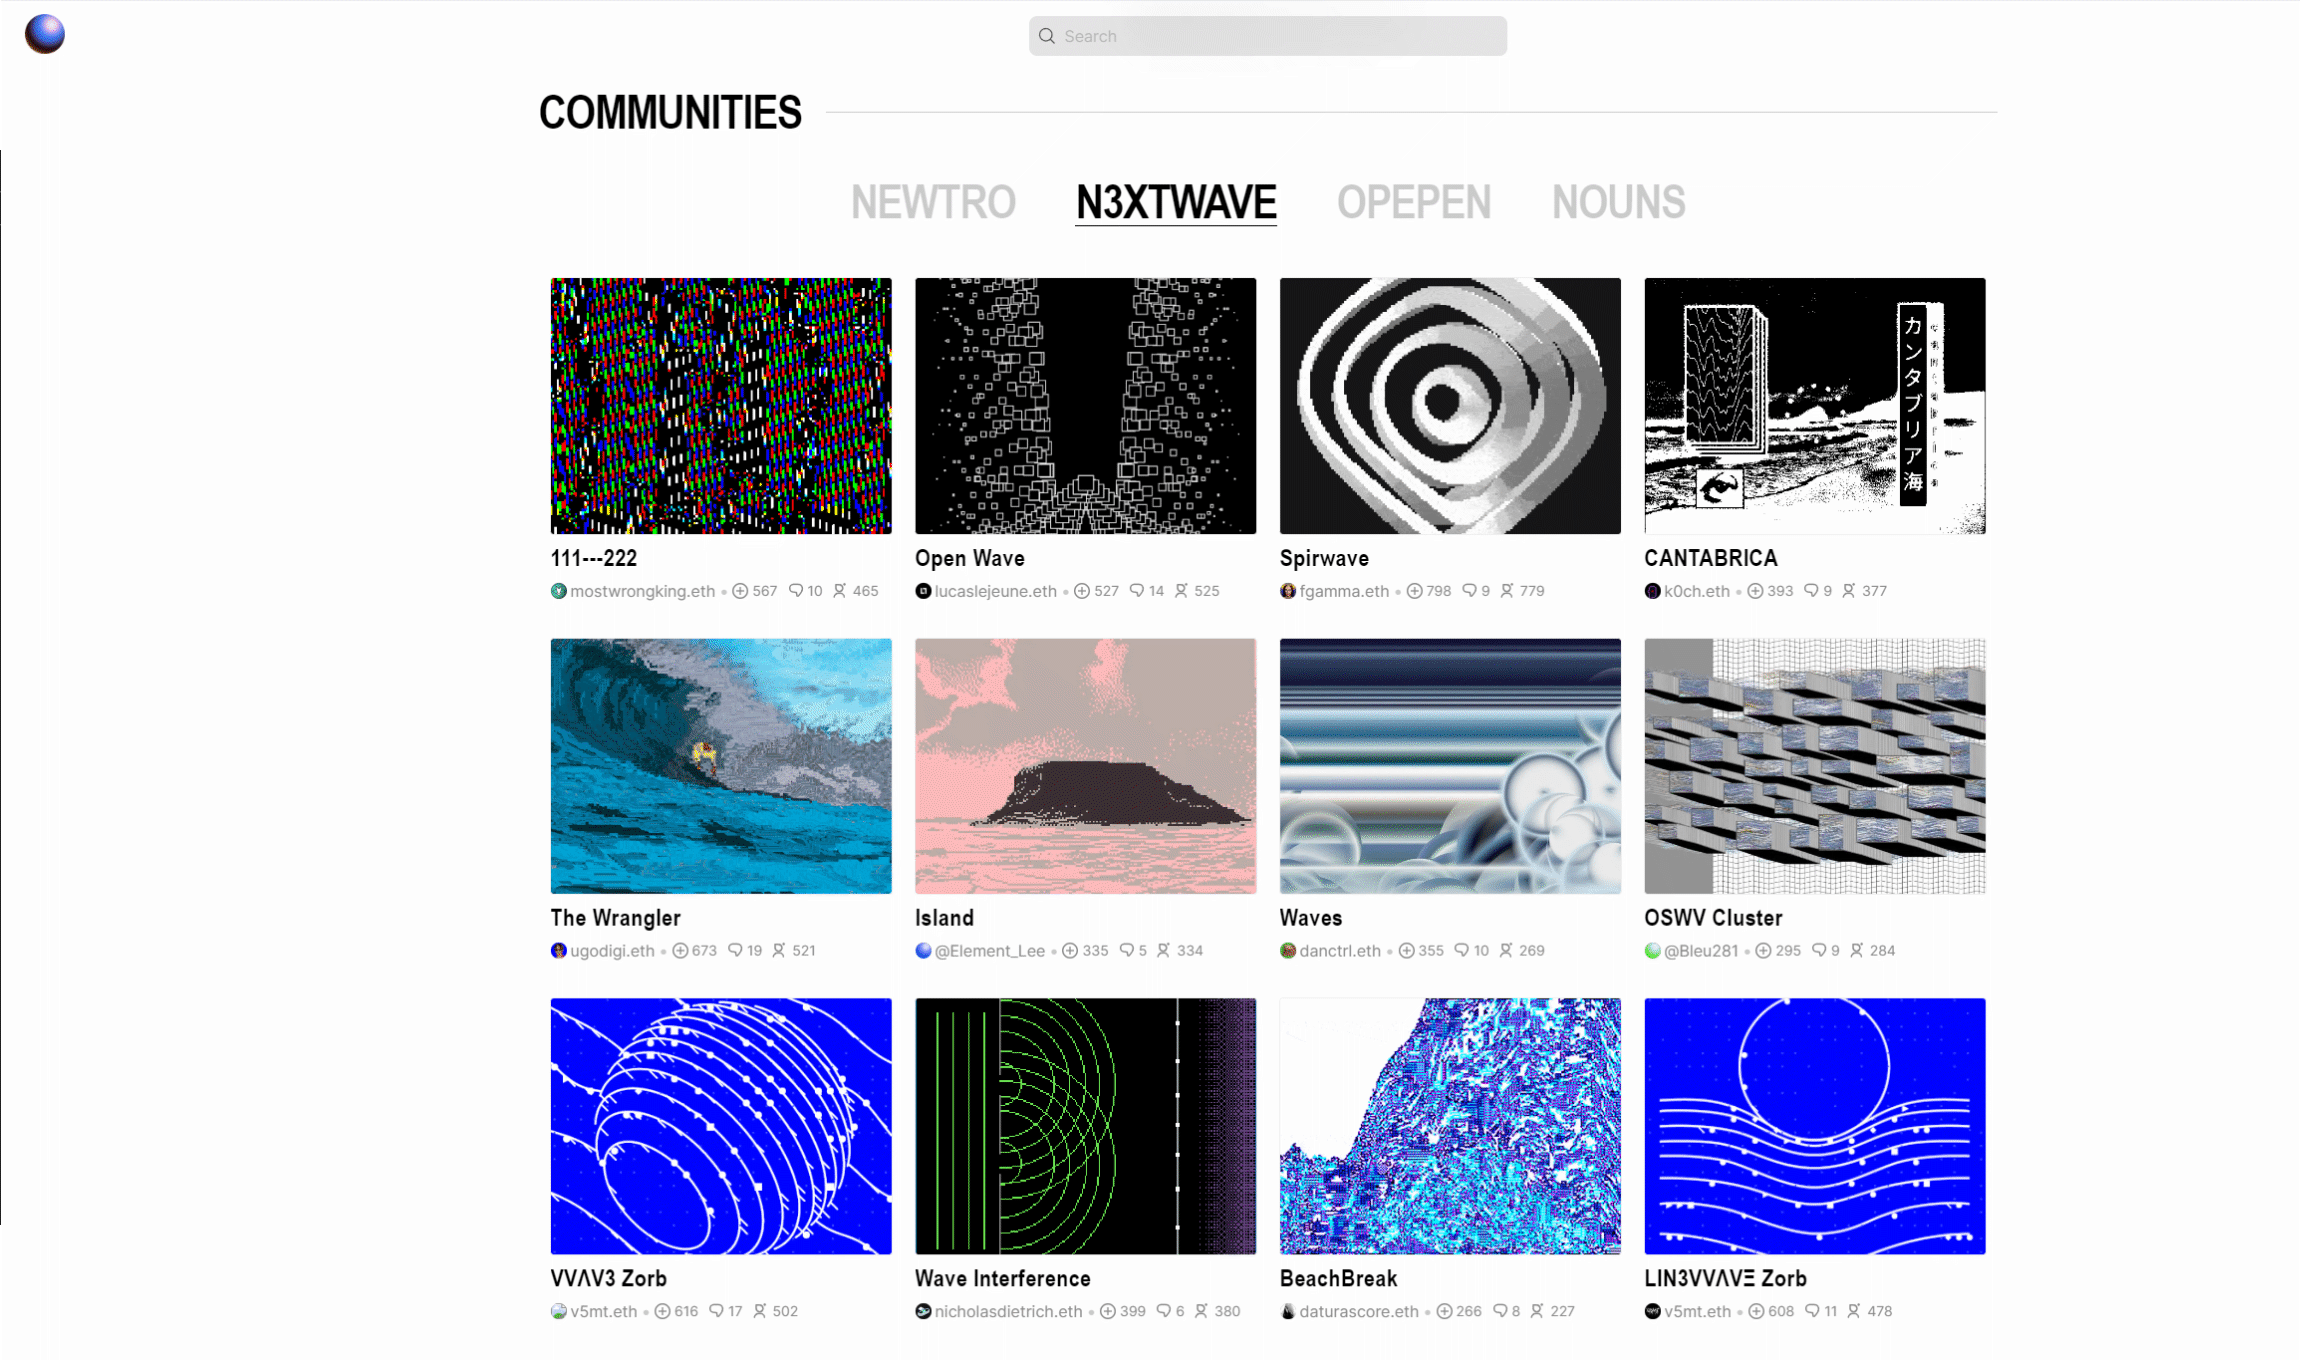 N3XTWAES' WAVE Collection featured in Zora's Communities section.